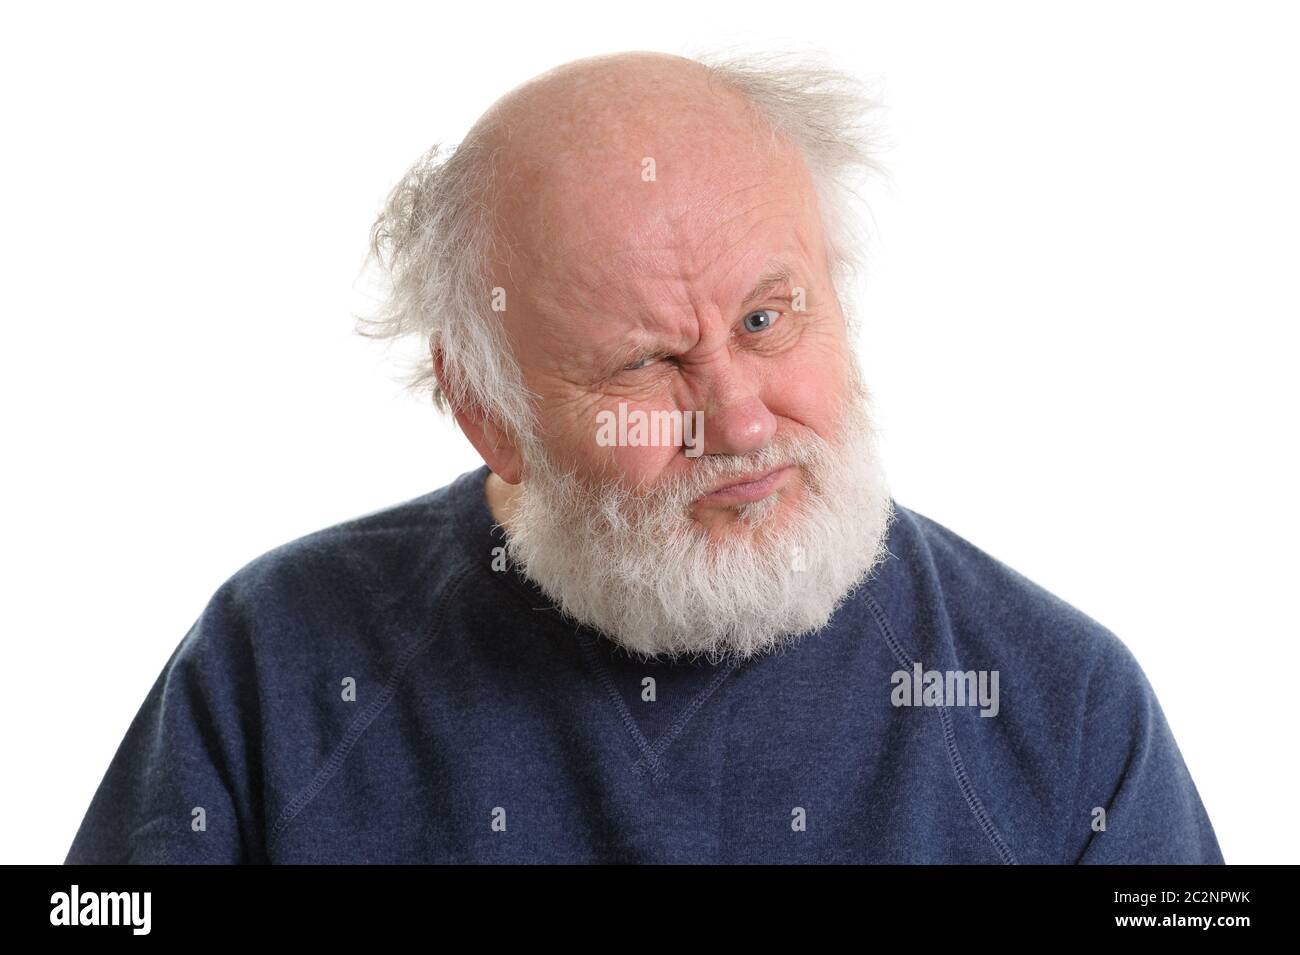 dissatisfied displeased old man isolated portrait Stock Photo